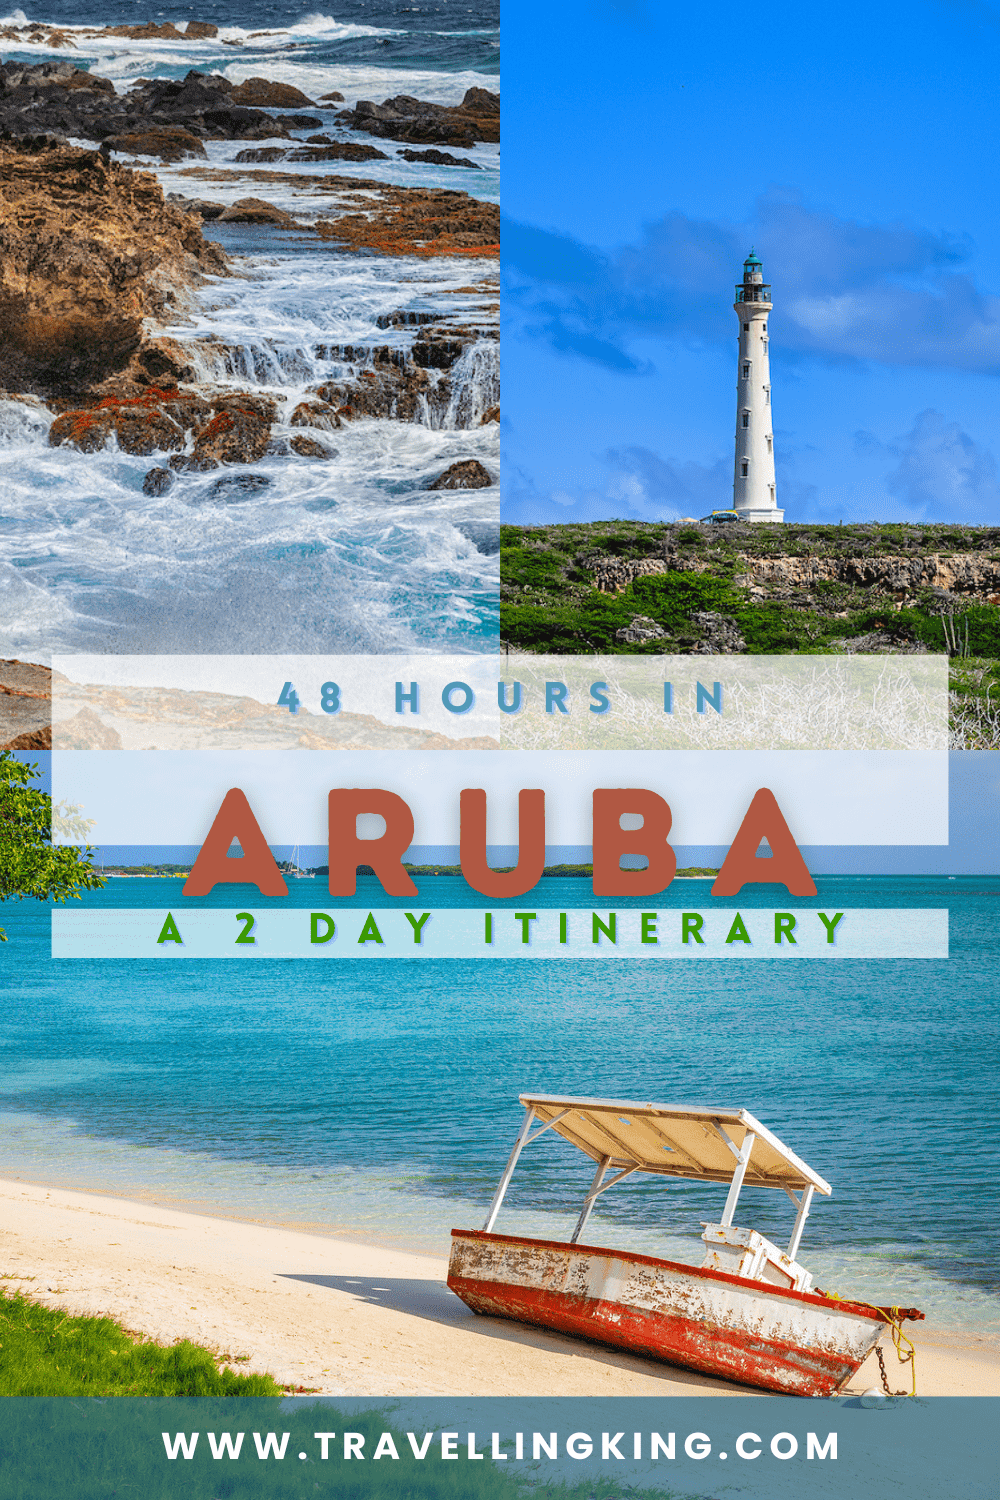 48 hours in Aruba - A 2 day Itinerary